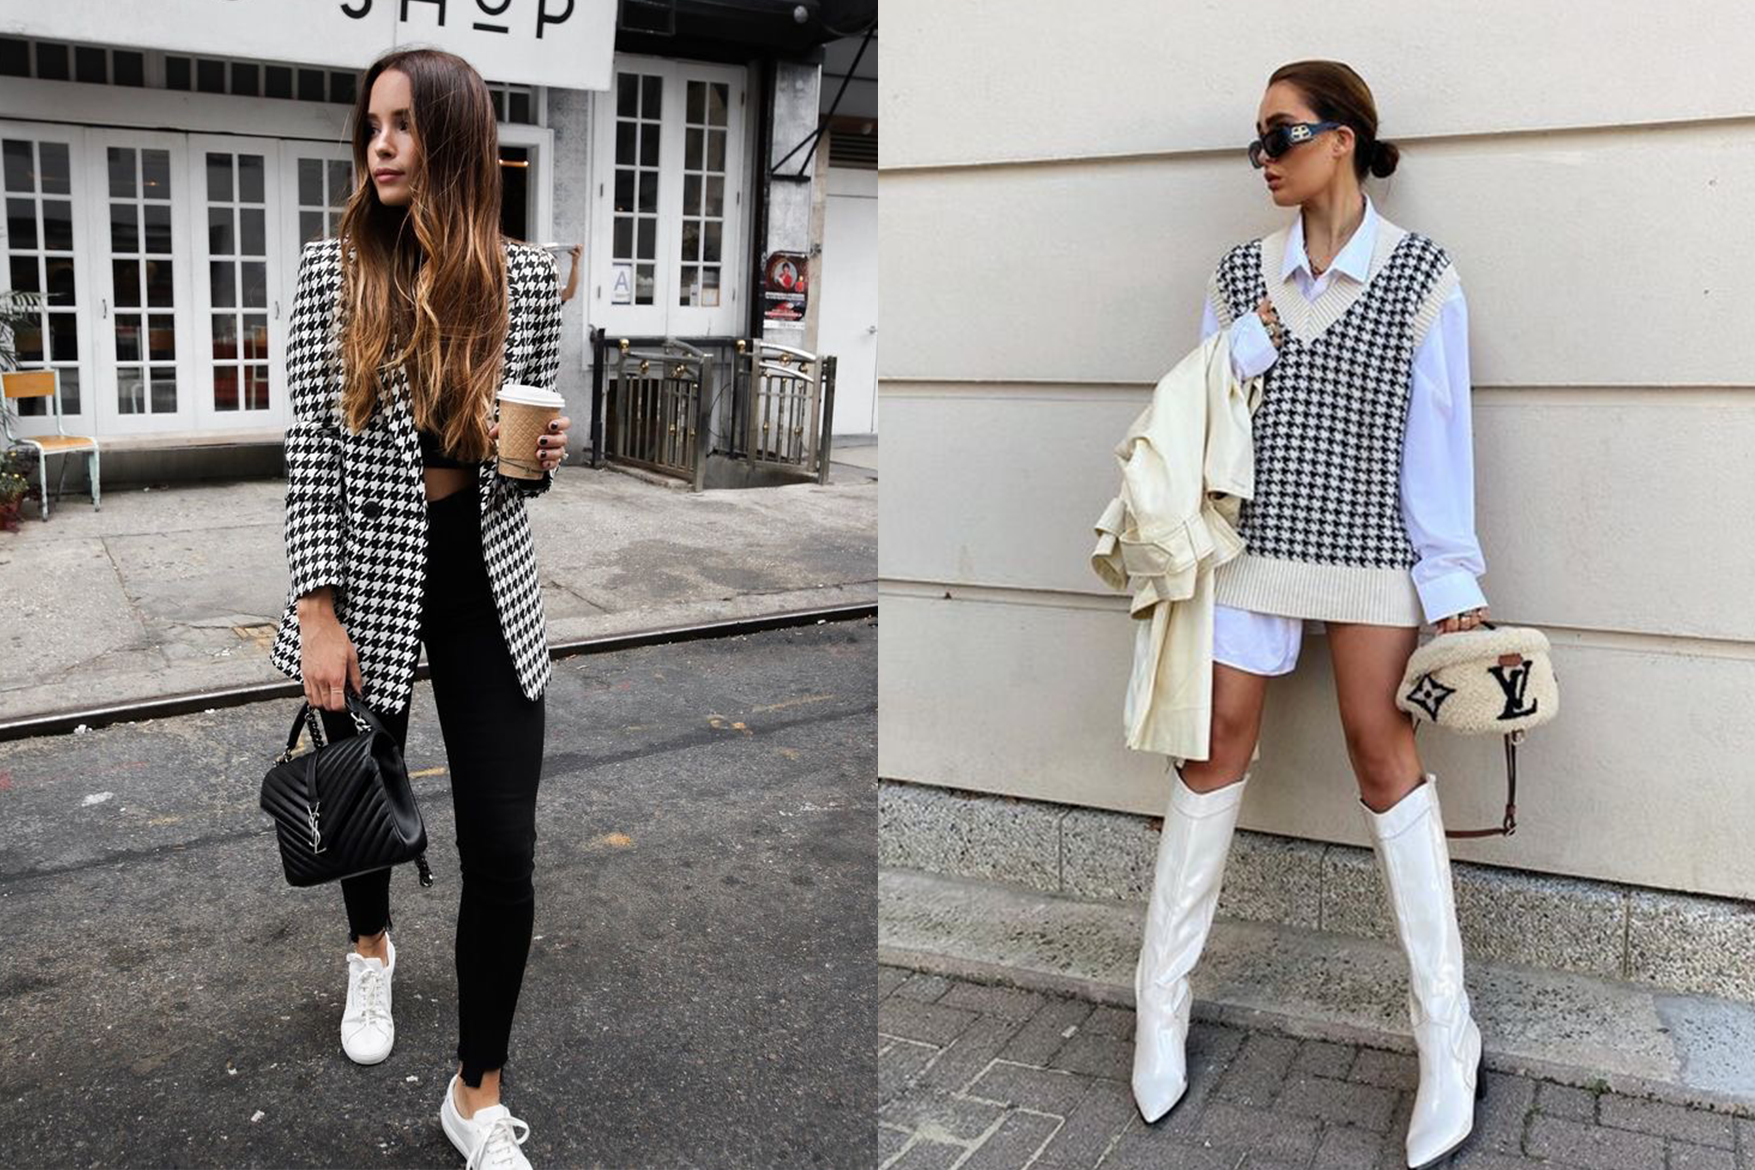 Topshop launches new sock boots that are identical to Balenciaga's £875  pair